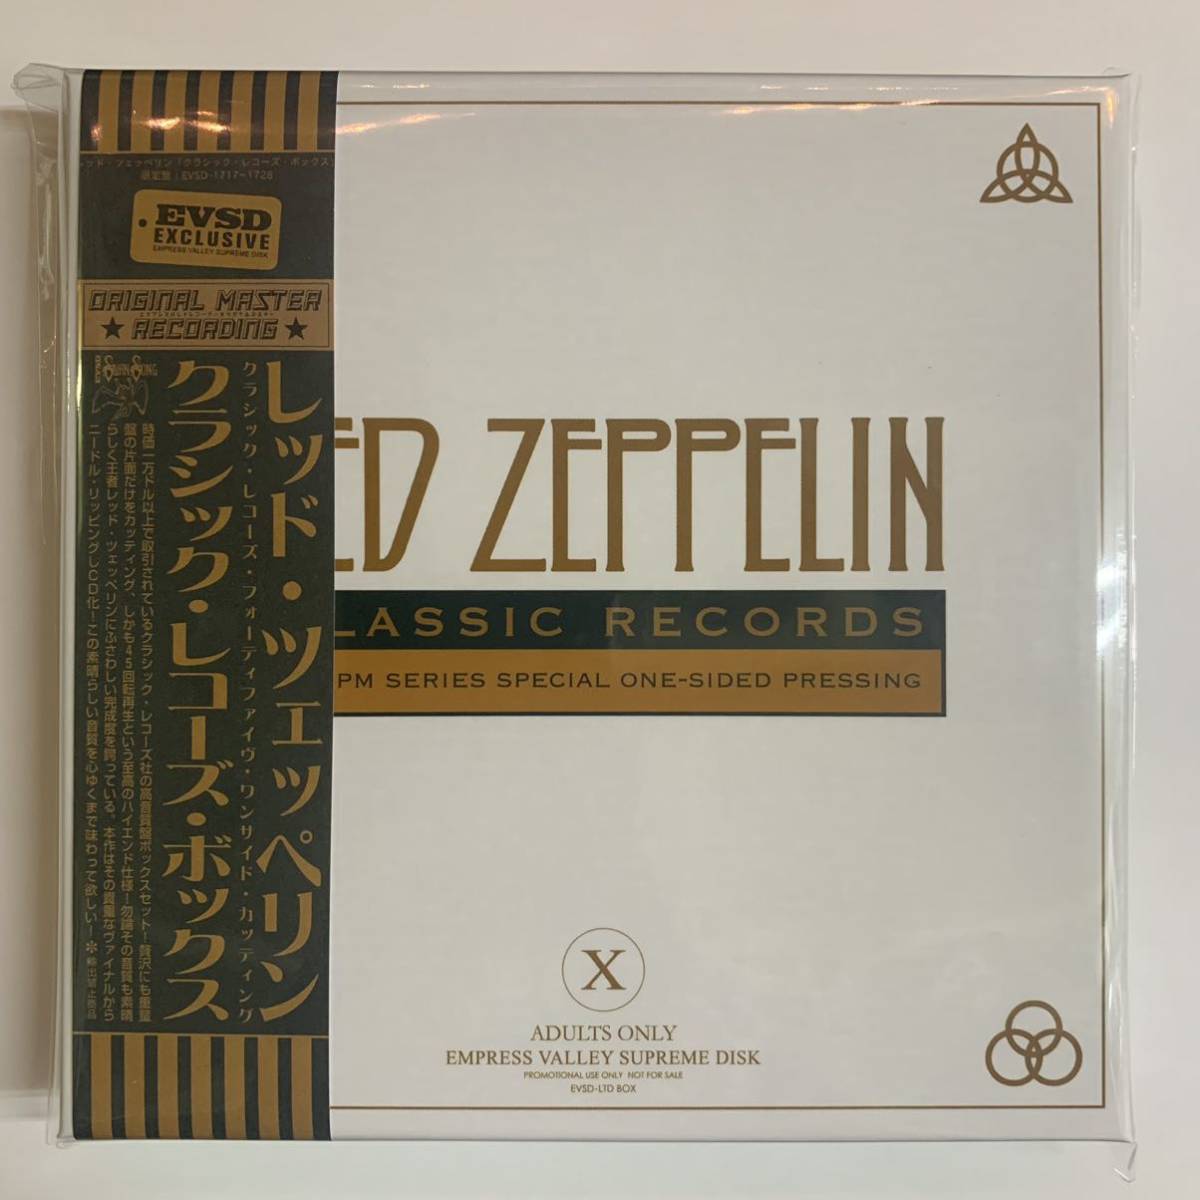 LED ZEPPELIN / CLASSIC RECORDS BOX -45RPM SERIES SPECIAL ONE-SIDED